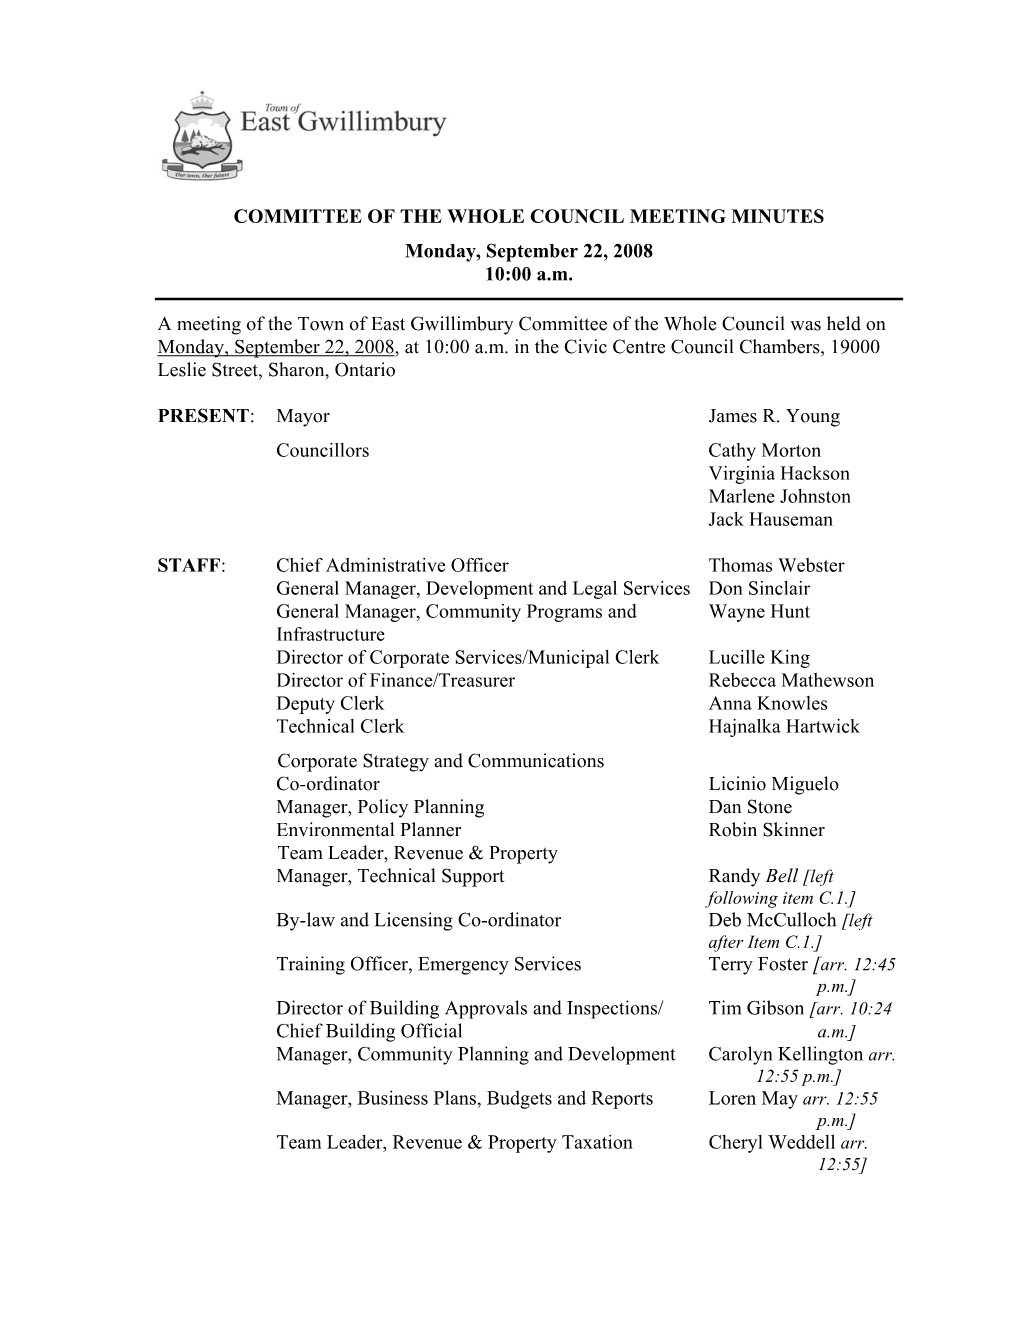 Committee of the Whole Council Meeting Minutes